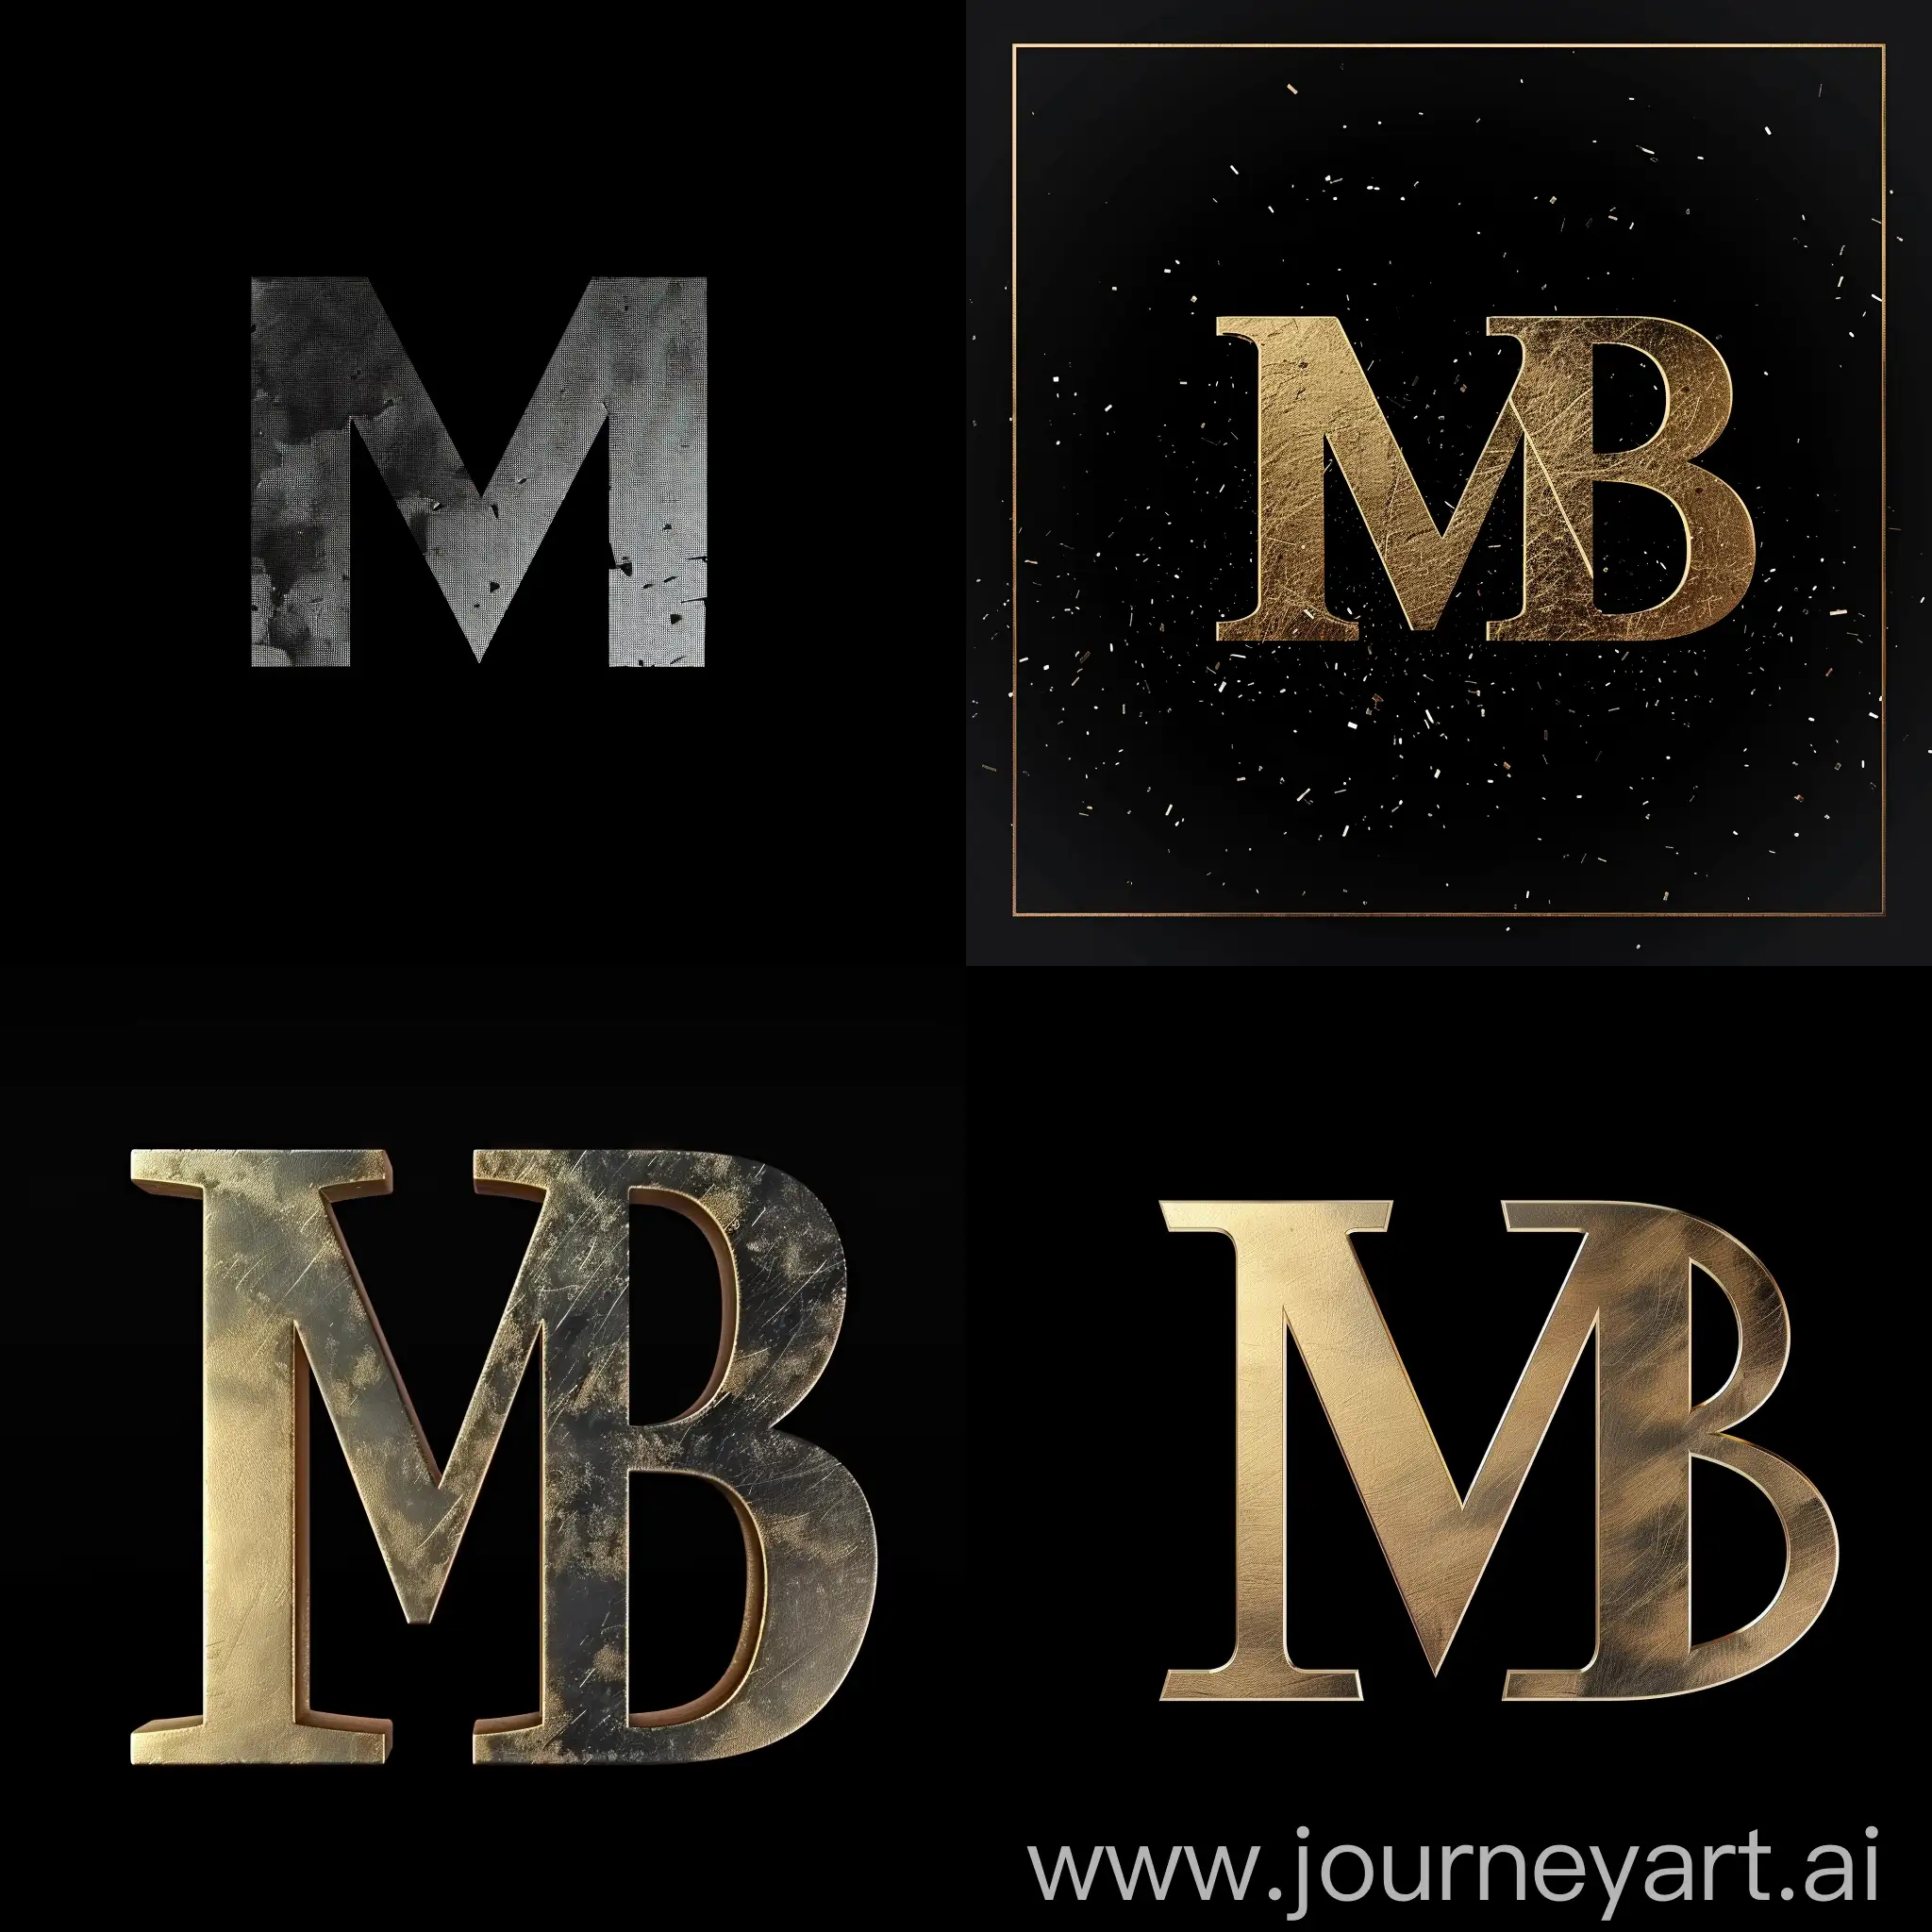 create a stylous   logo with letter "MB", no shaders,  no background